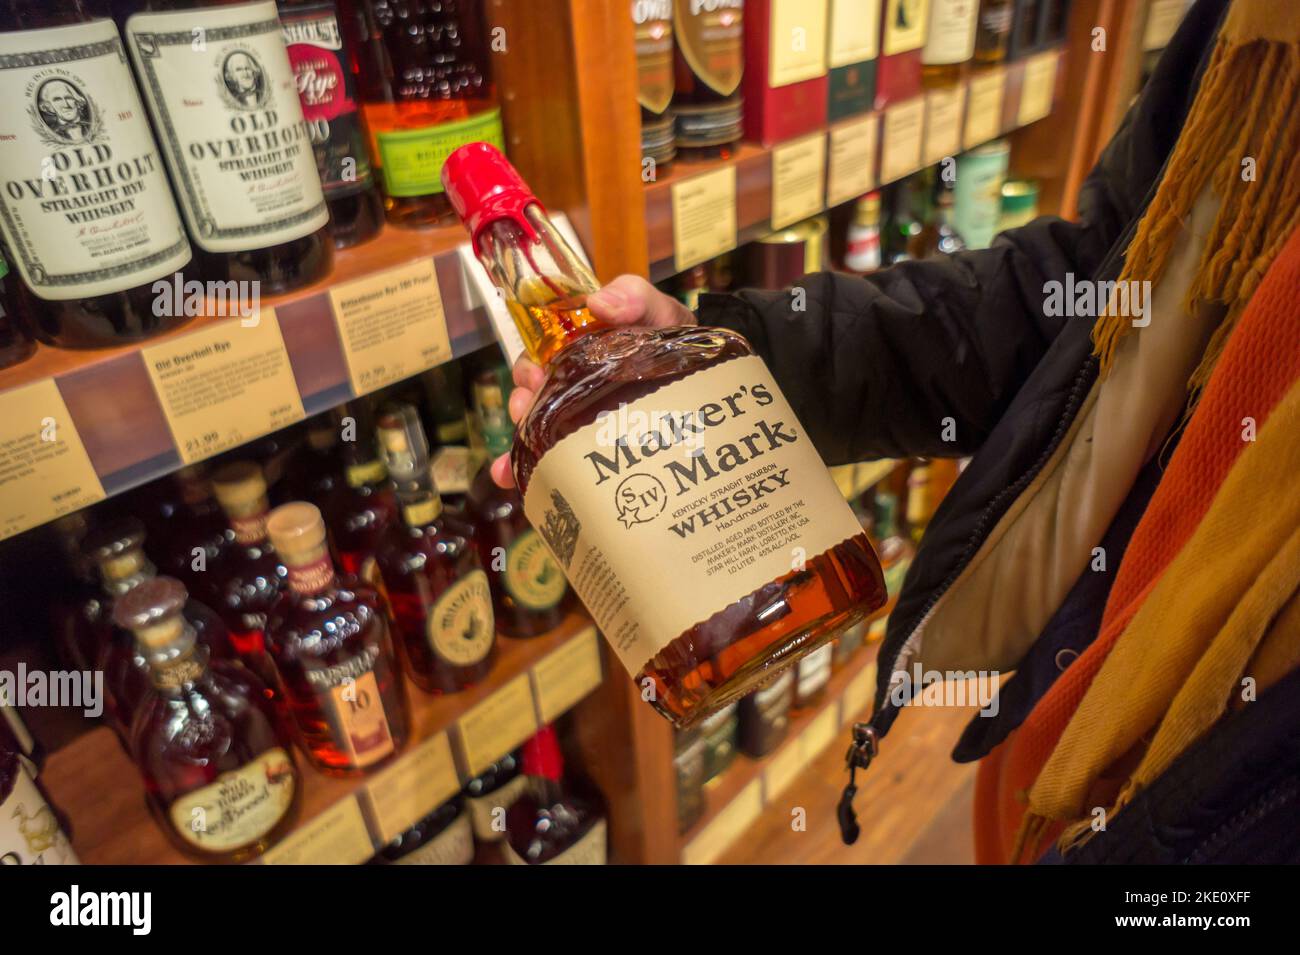 A consumer prepares to purchase a bottle of Maker's Mark bourbon in a liquor store in New York on Tuesday, January 14, 2014.  The Japanese company Suntory Holdings has proposed the purchase of Beam Inc., the maker of Jim Beam, Maker's Mark and other liquors, for $16 billion.  Suntory is one of Japan's largest brewers and the purchase, if approved,  would make the company the third largest liquor produce behind Diageo and Pernod Ricard. (© Richard B. Levine) Stock Photo